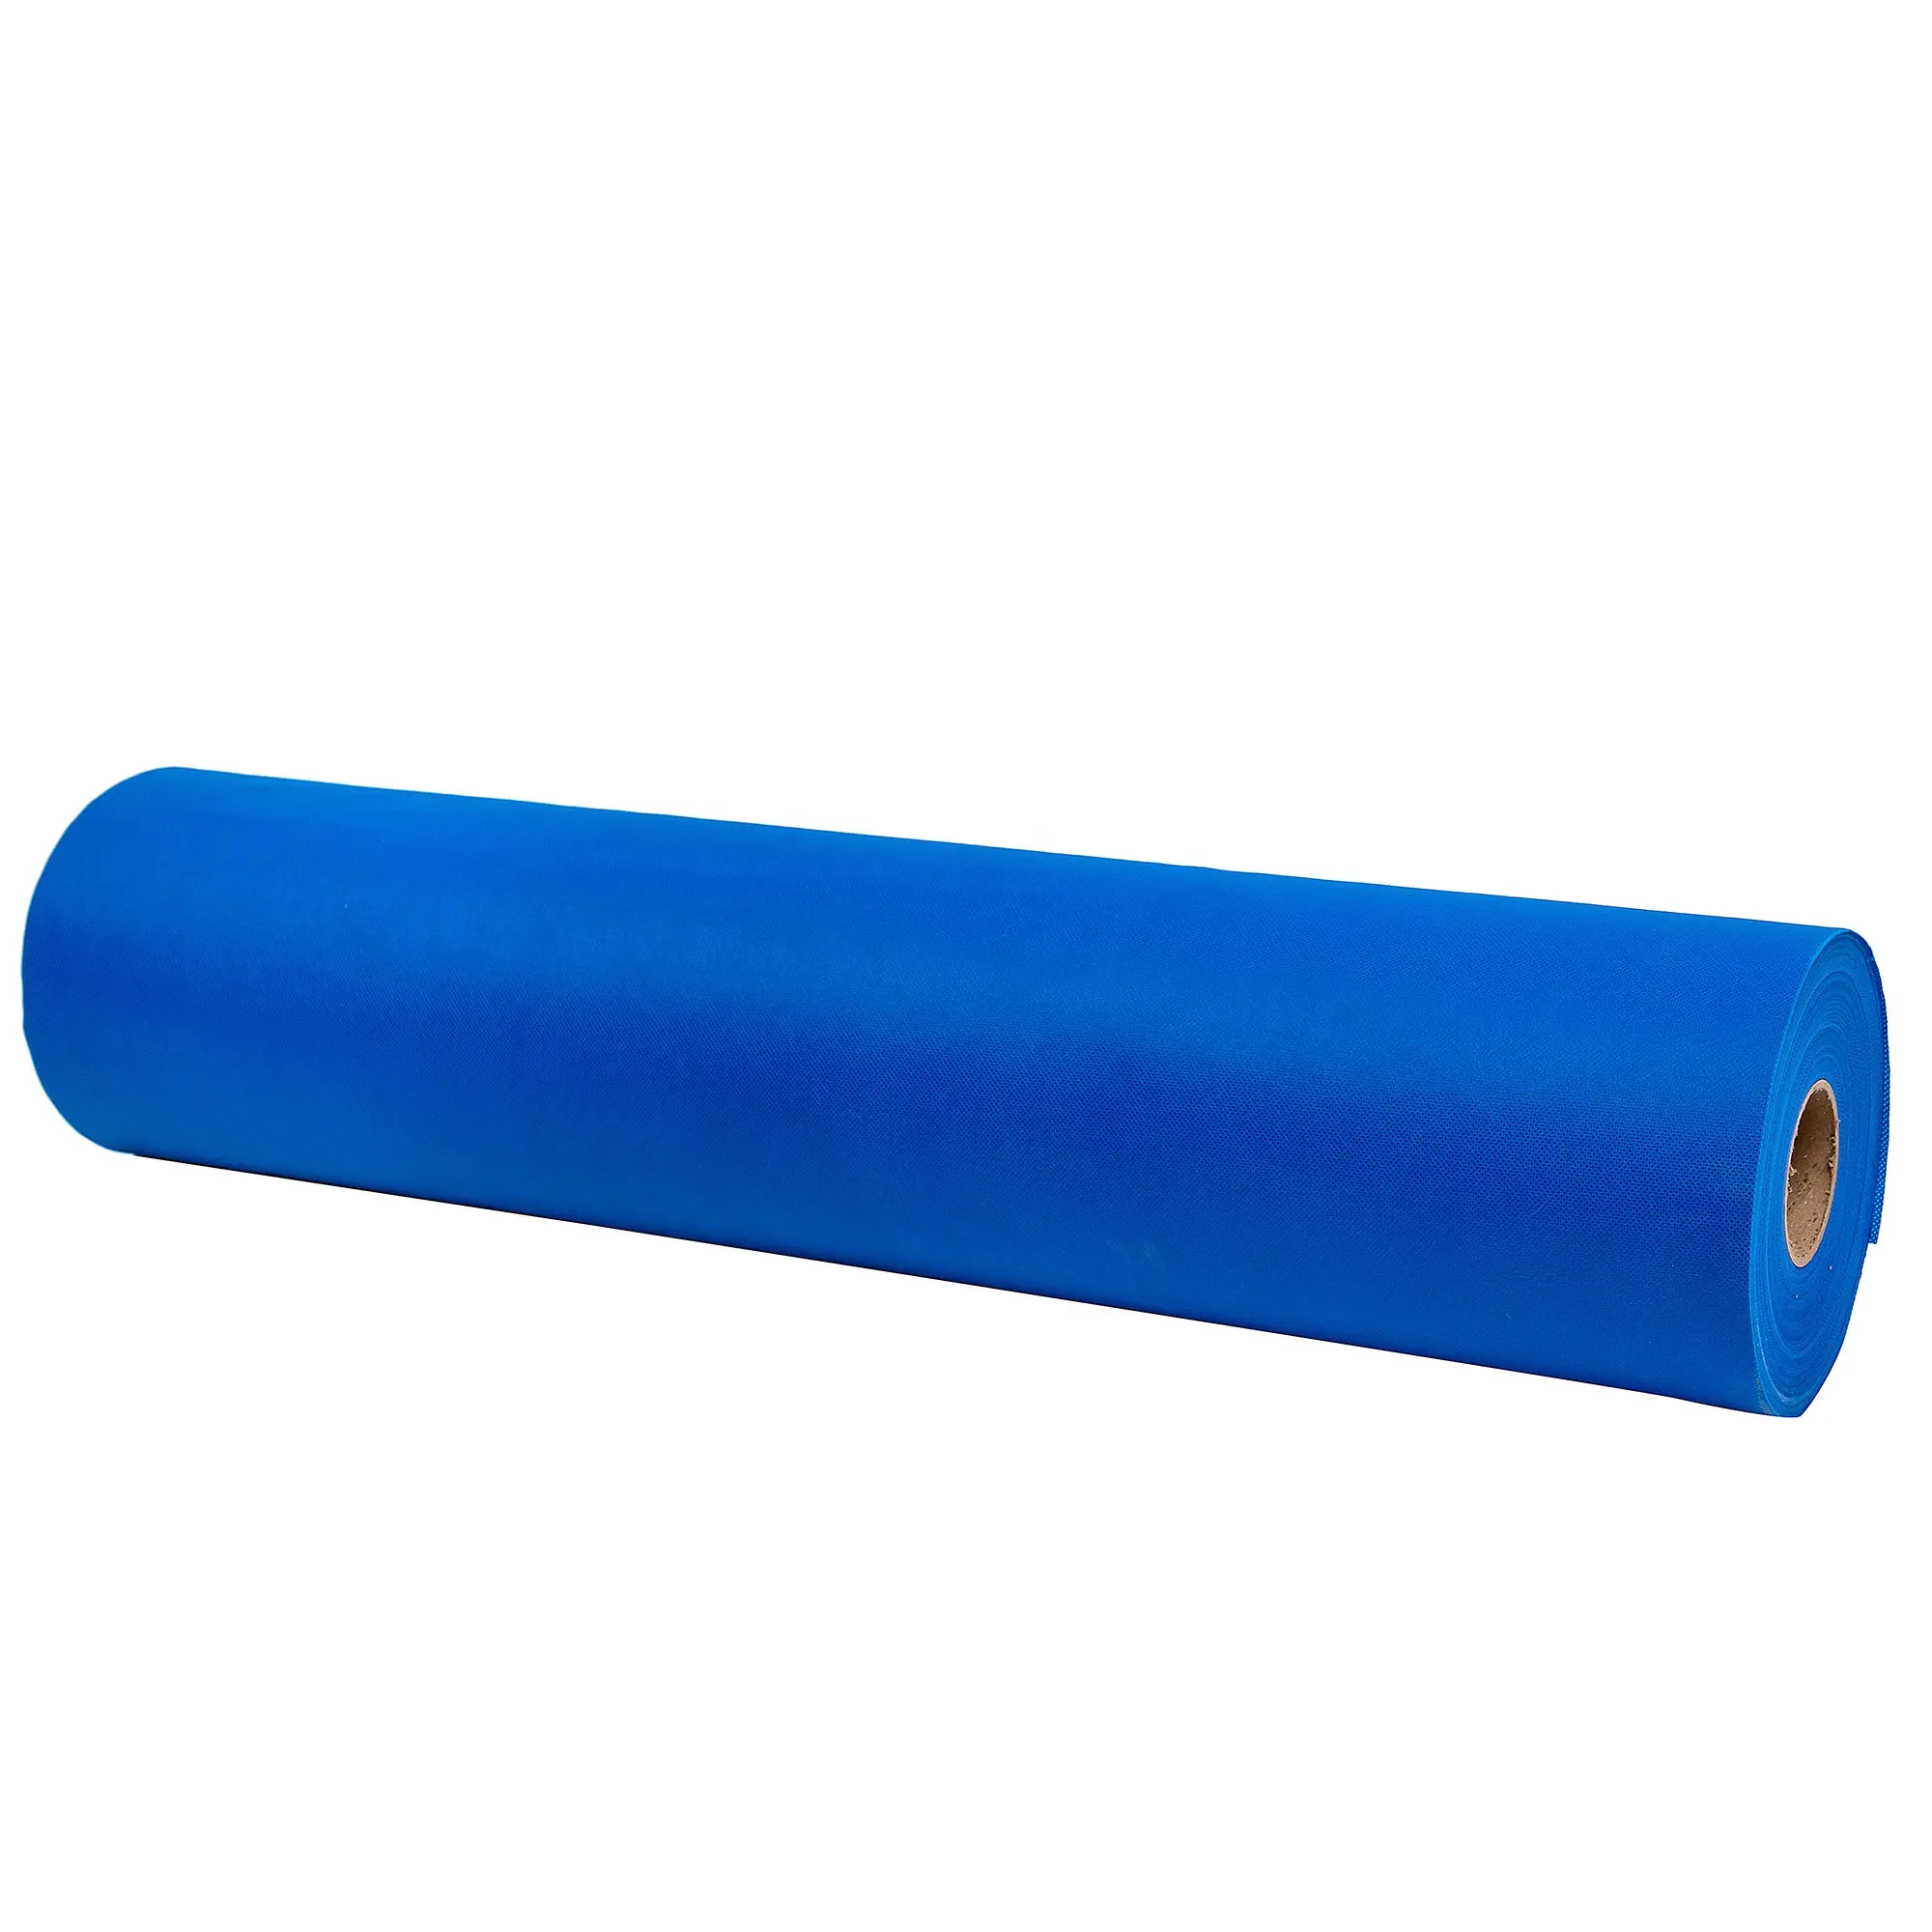 Pp Spunbonded Nonwoven Fabric factory supply polypropylene fabrics nonwoven Carry Bags material non-woven roll